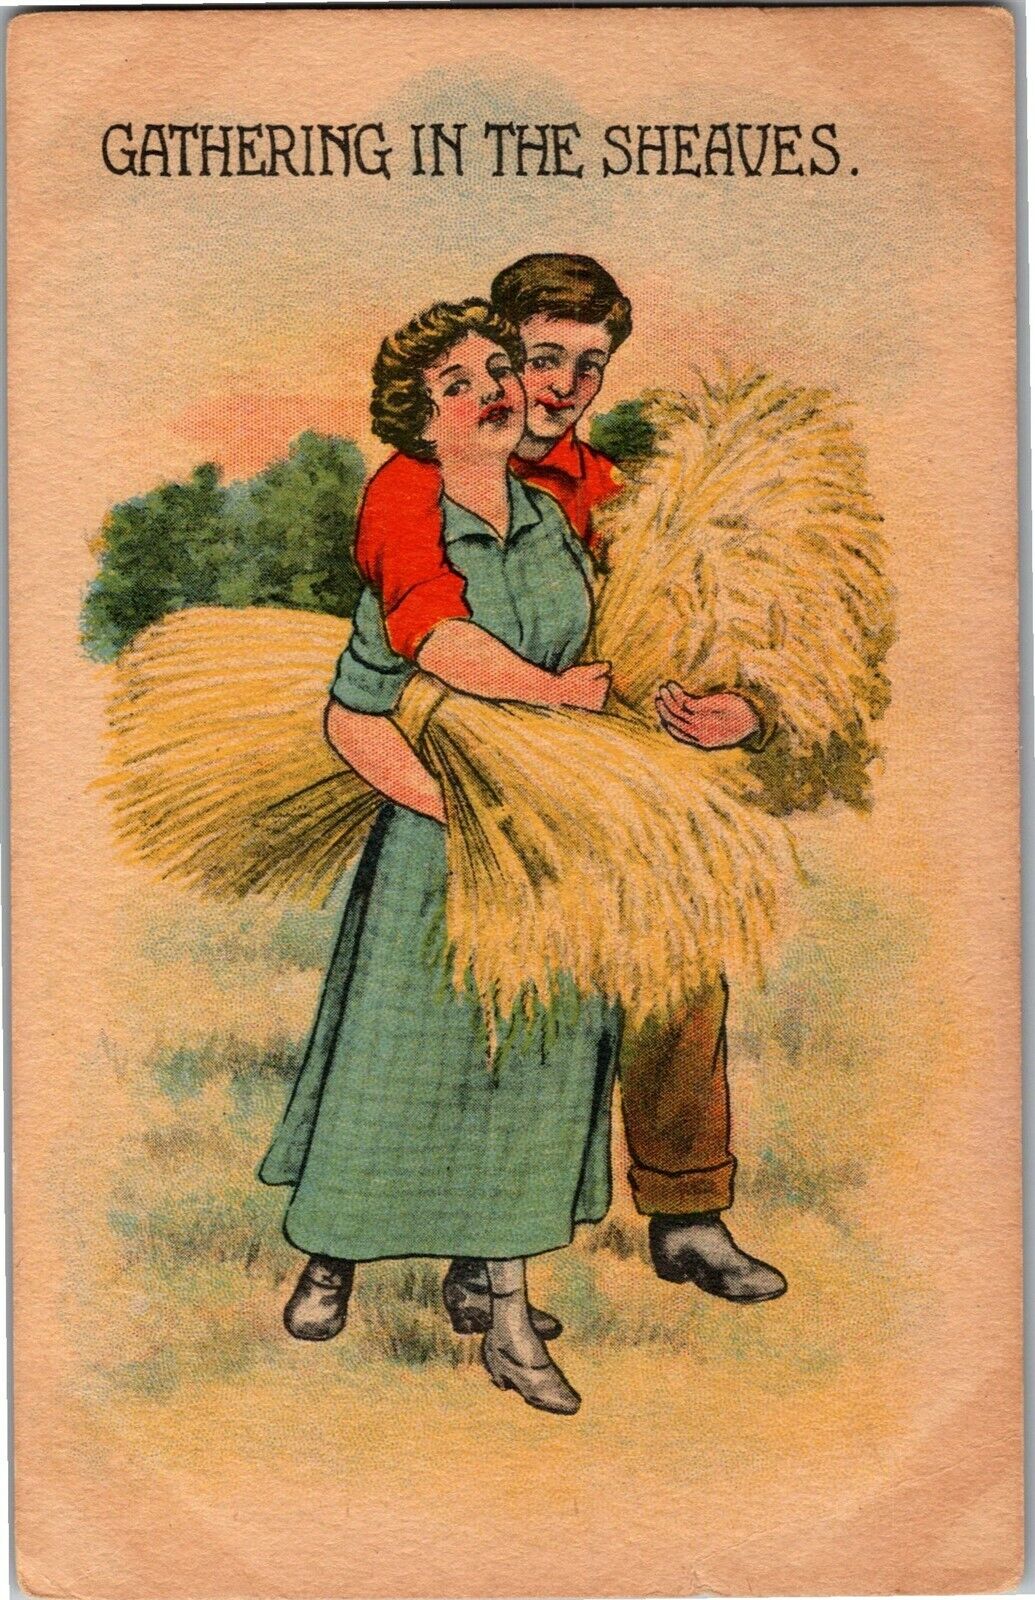 Man Embraces Woman, Gathering In the Sheaves Vintage Postcard D48